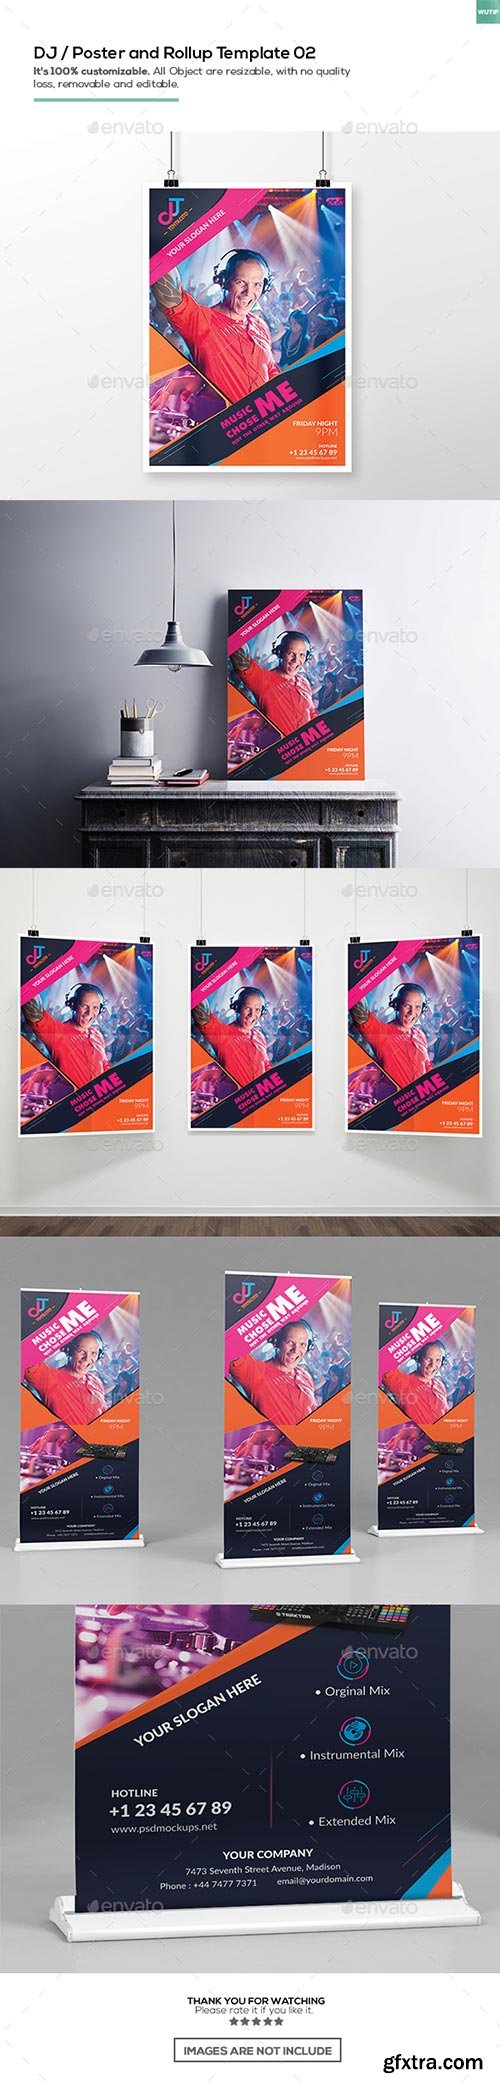 Graphicriver - DJ/ A3 Poster and Rollup Template 02 16207453